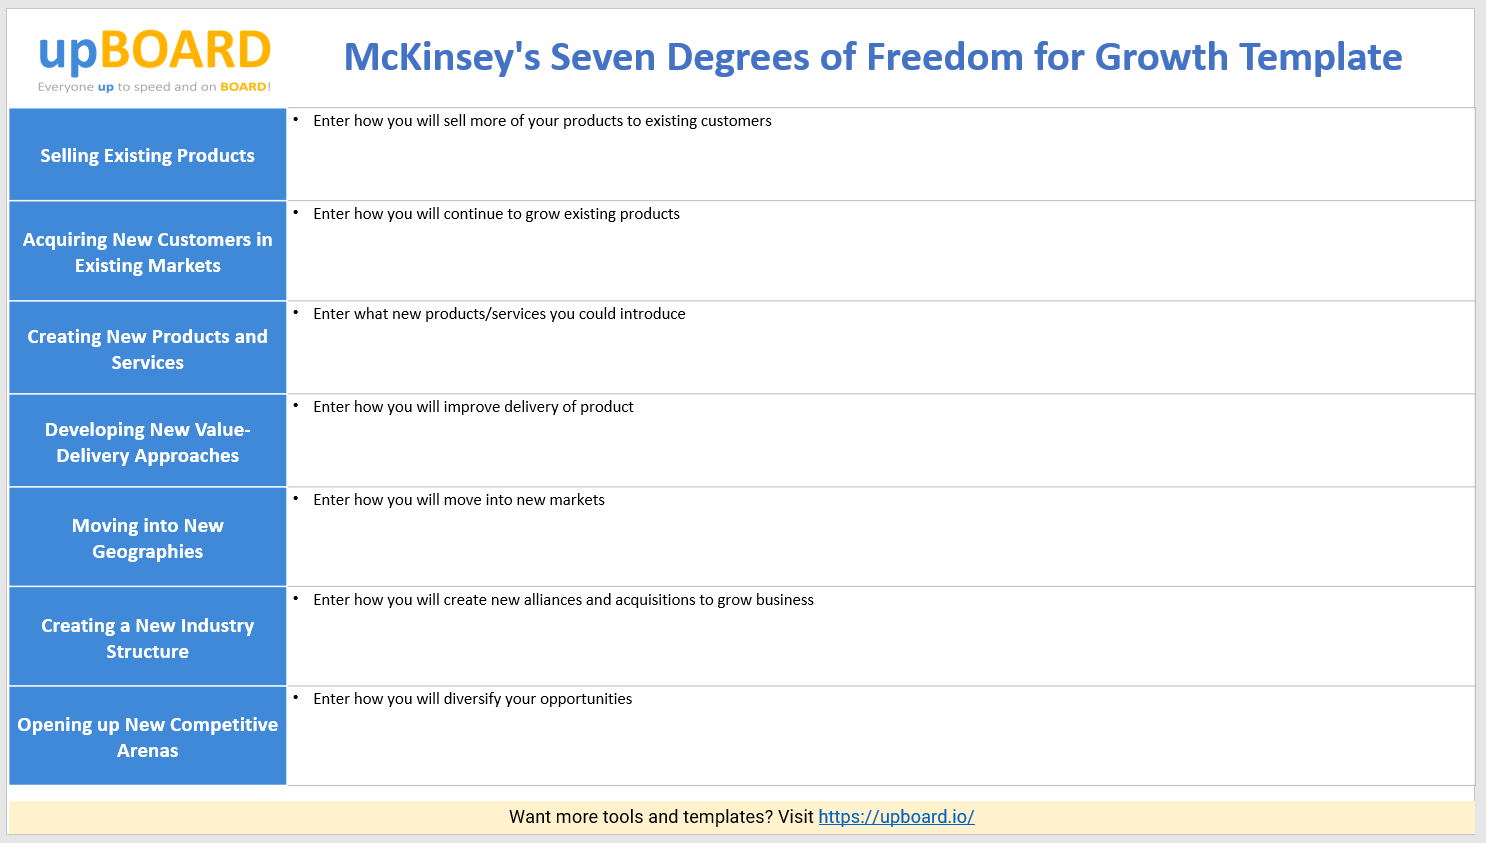 Mckinsey's Seven Degrees Of Freedom For Growth Online Tools Intended For Mckinsey Business Plan Template